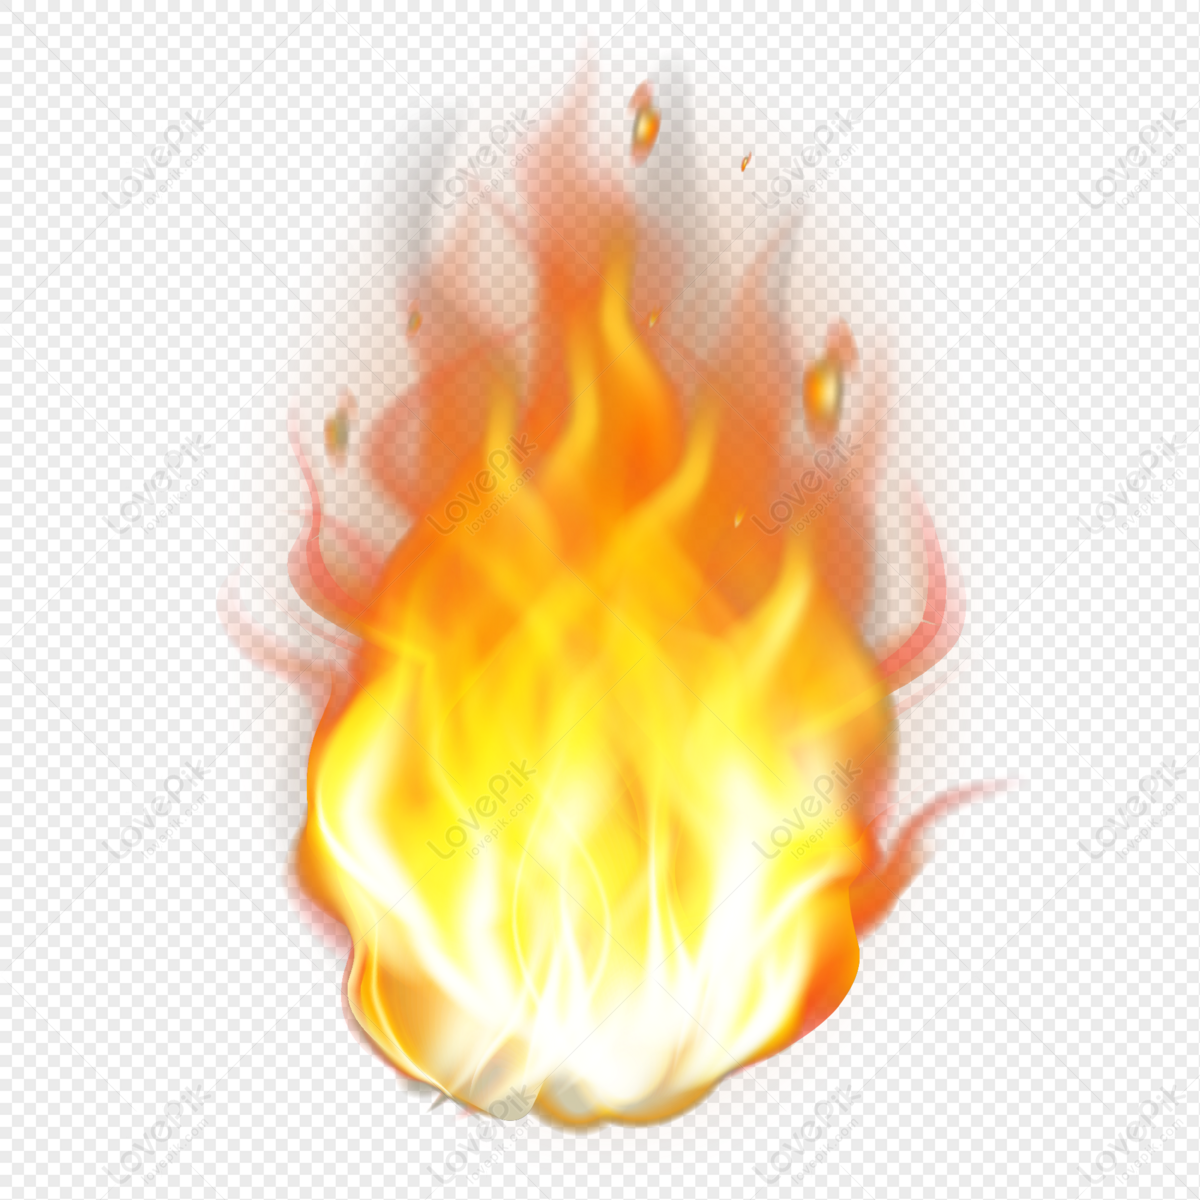 Burning Fire PNG Transparent Background And Clipart Image For Free Download  - Lovepik | 401443770